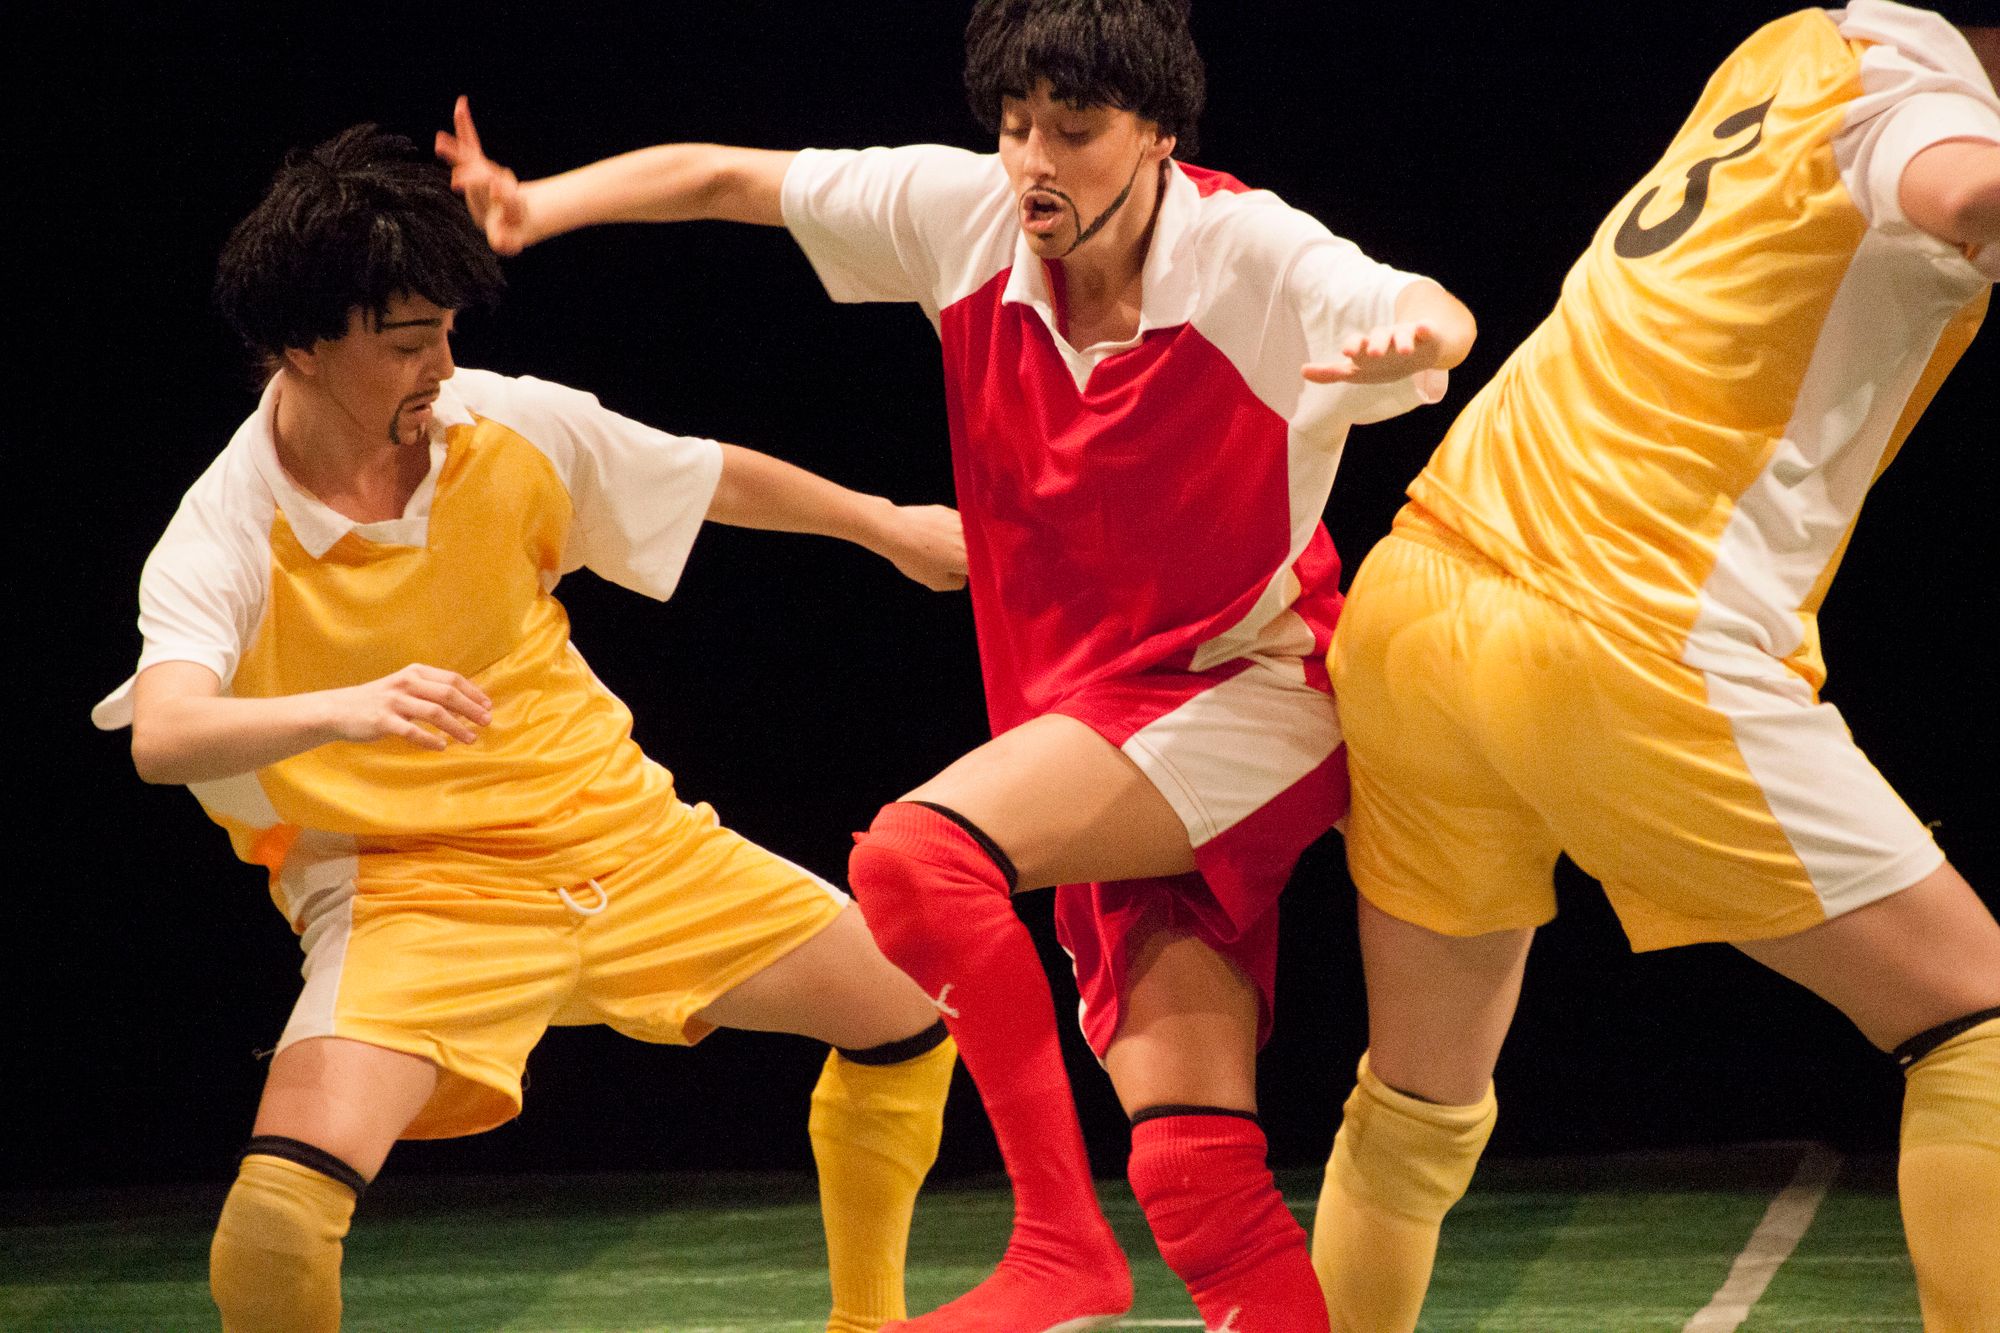 Dance Performance Portrays Soccer Like You’ve Never Seen It Before